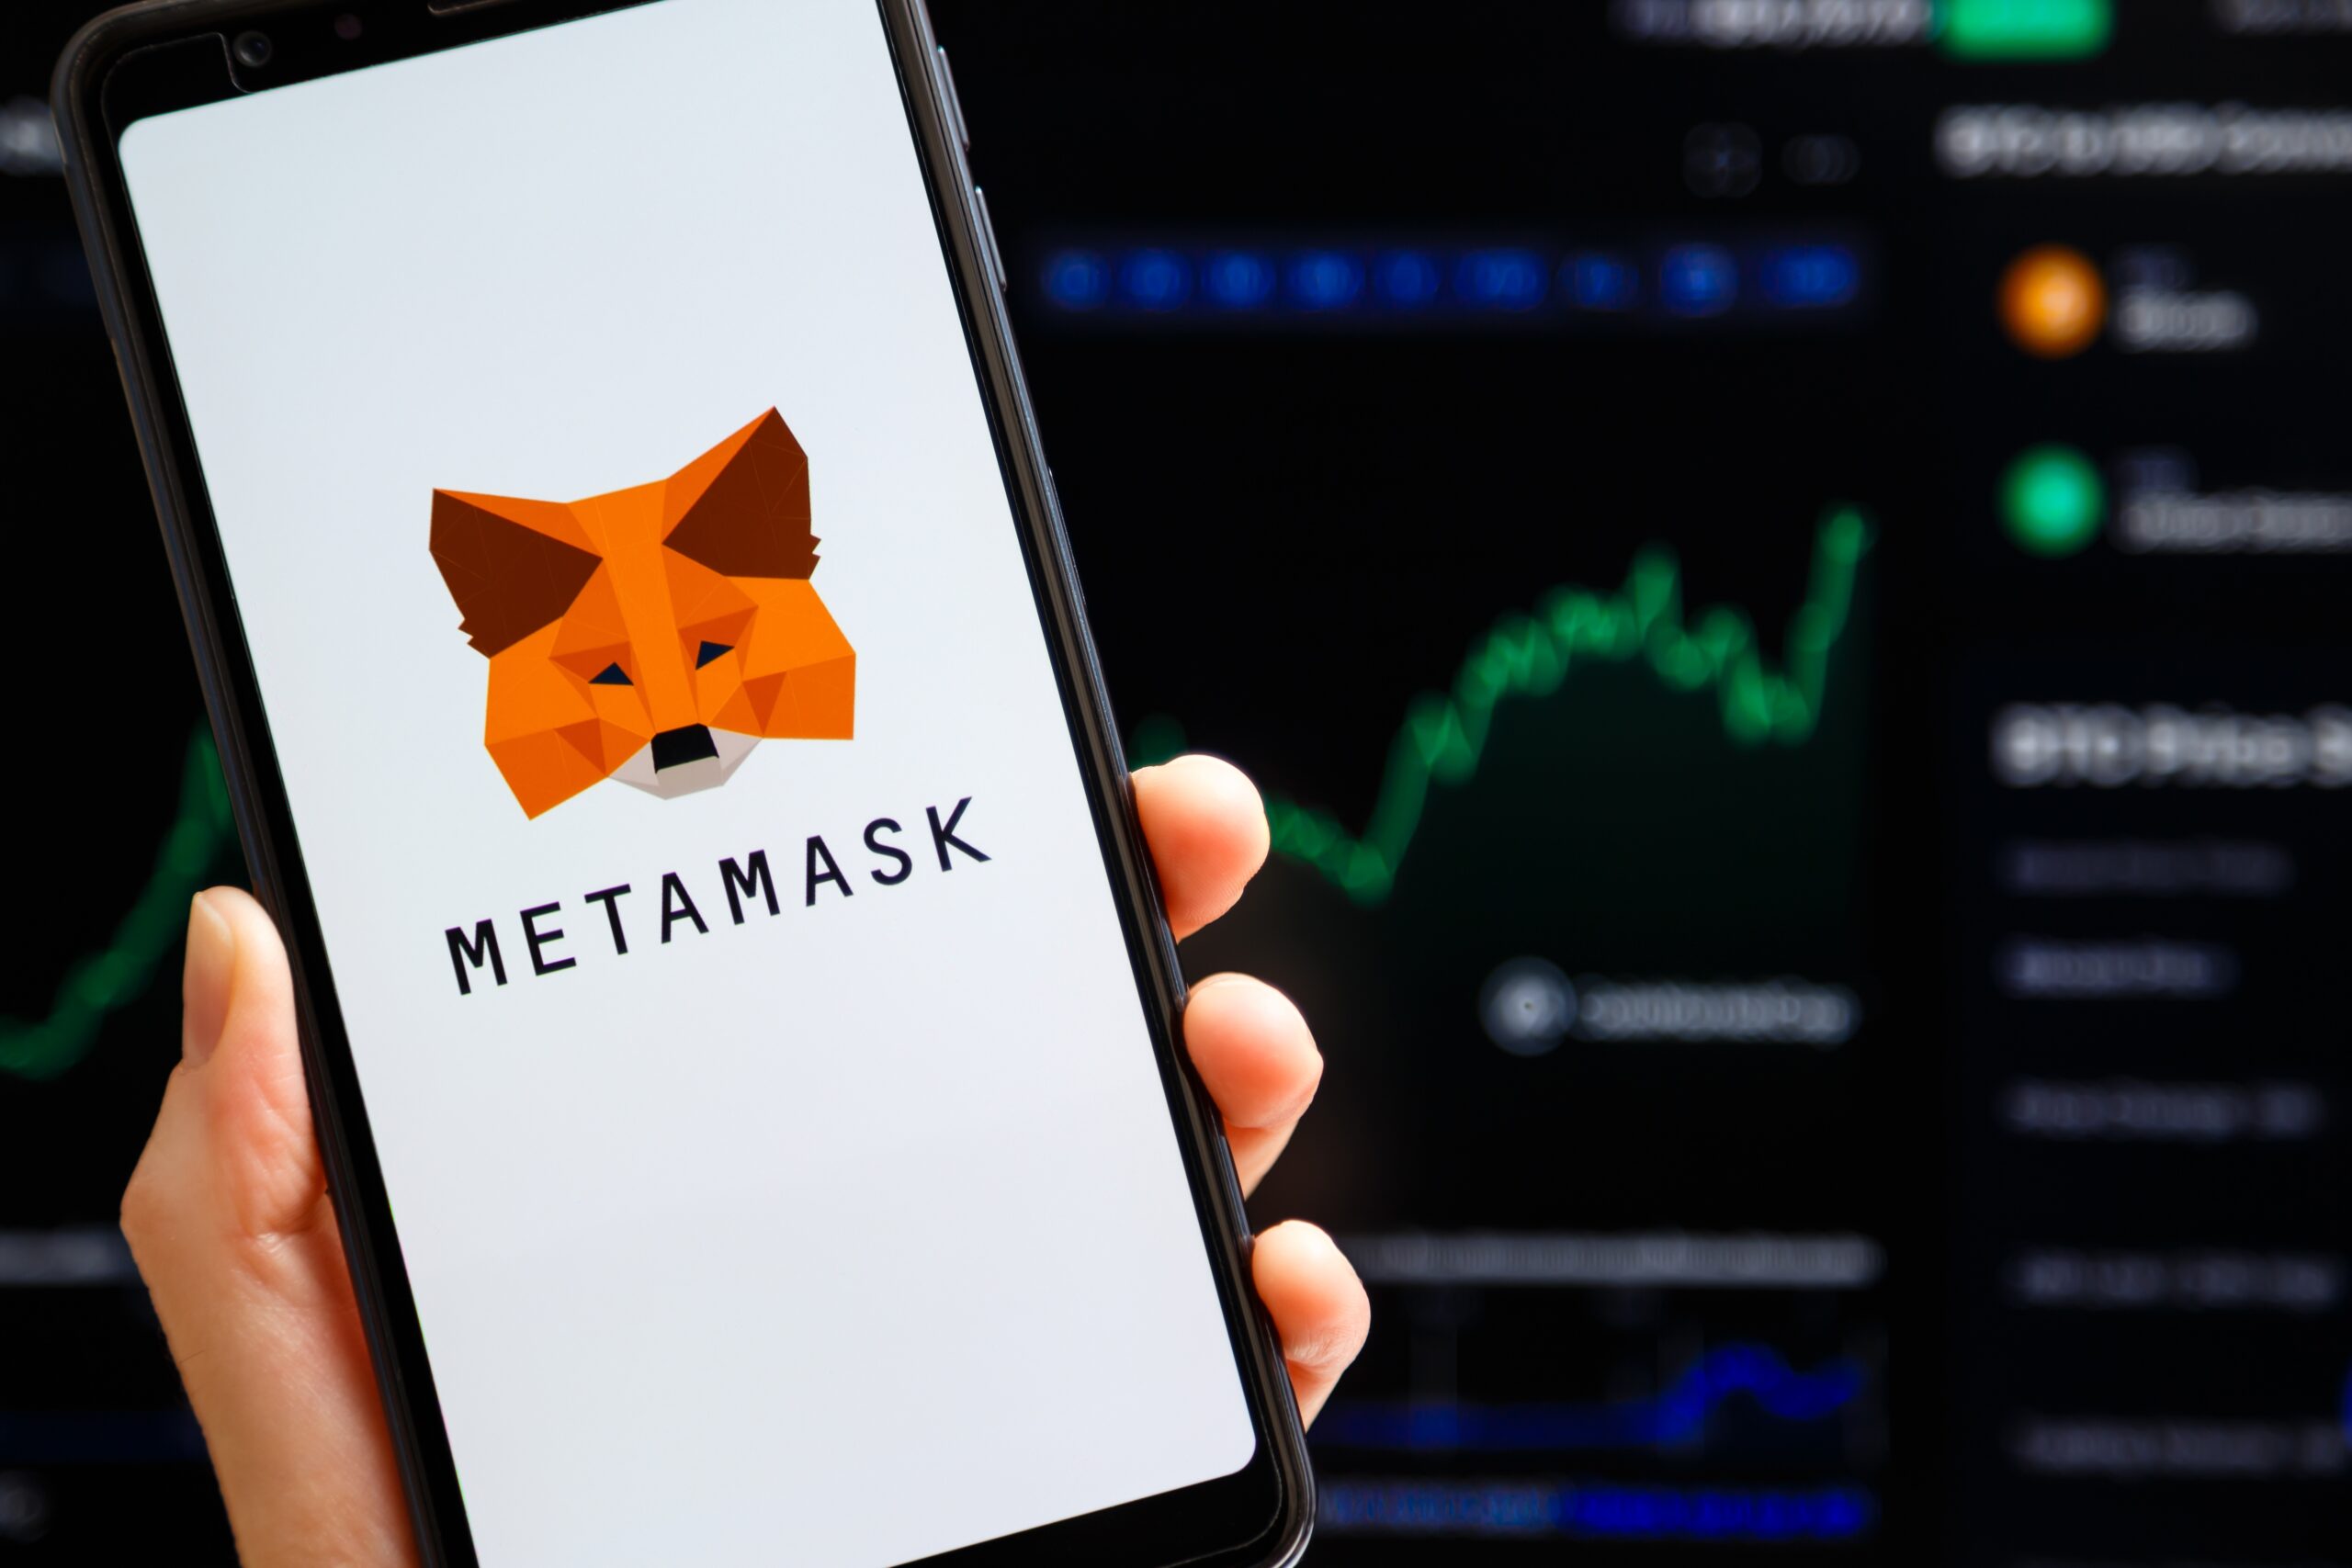 MetaMask's Pooled Staking Opens Ethereum Staking to More Users